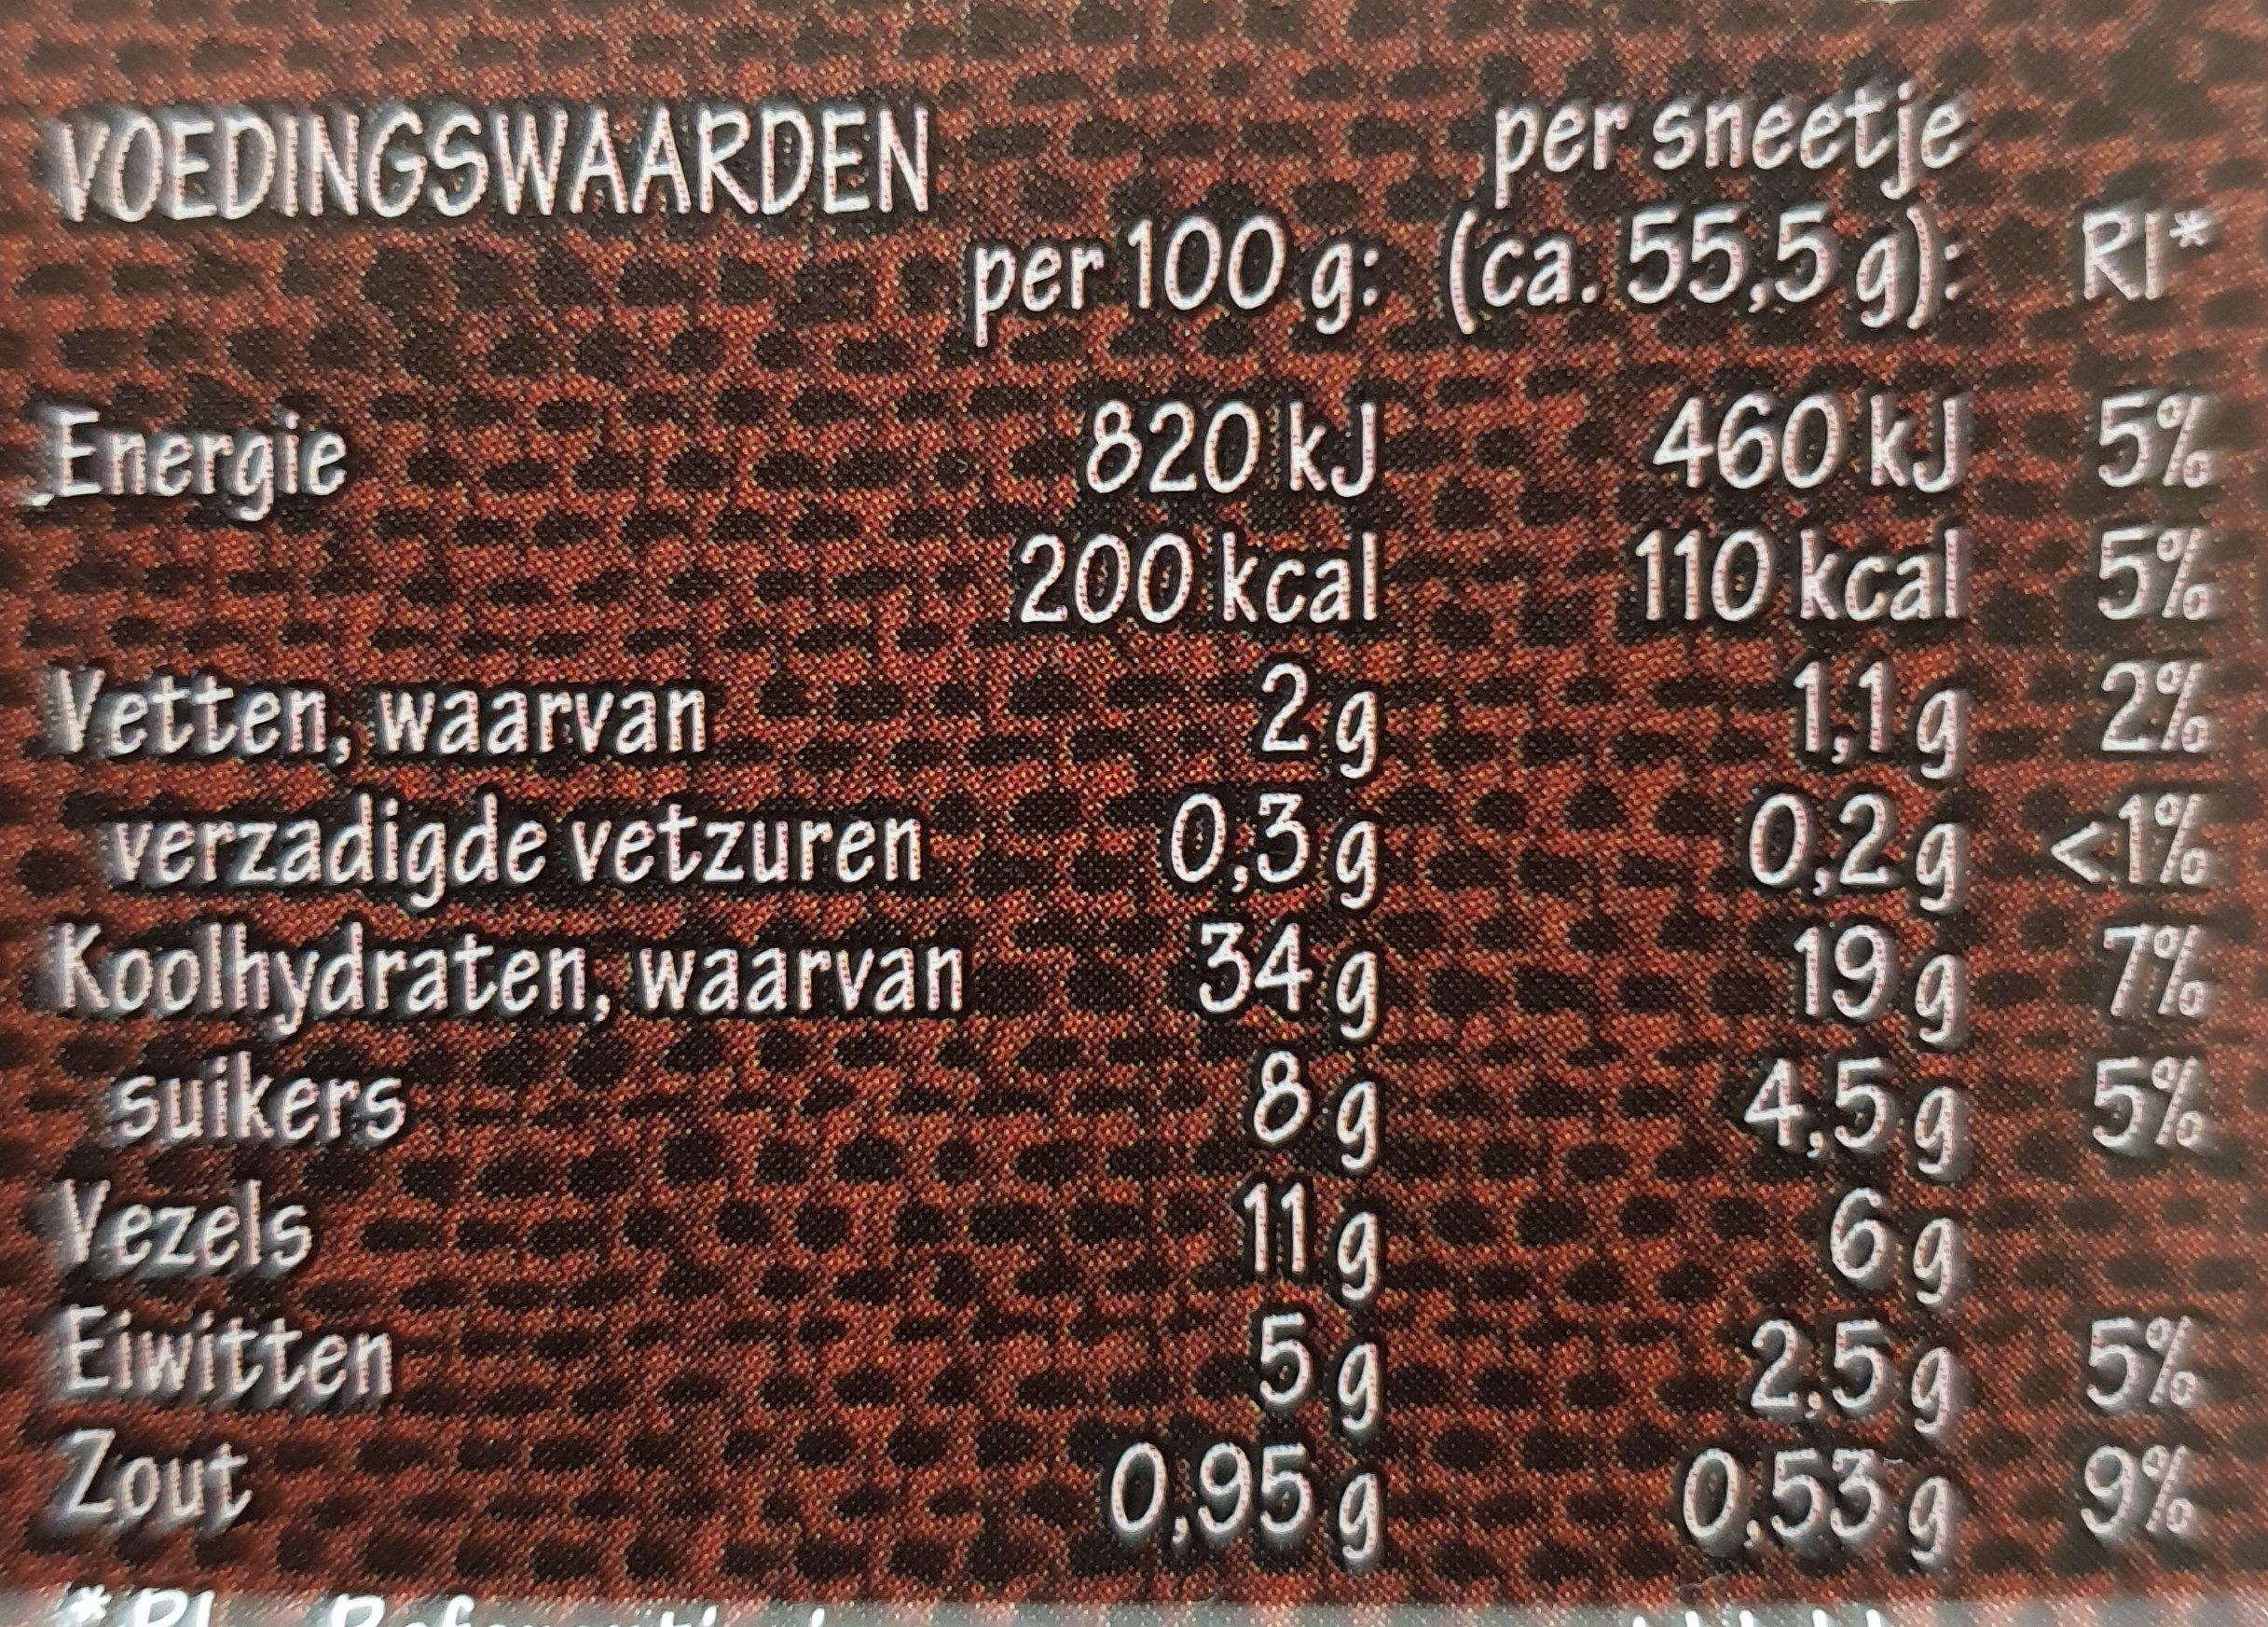 Fries roggebrood - Nutrition facts - nl